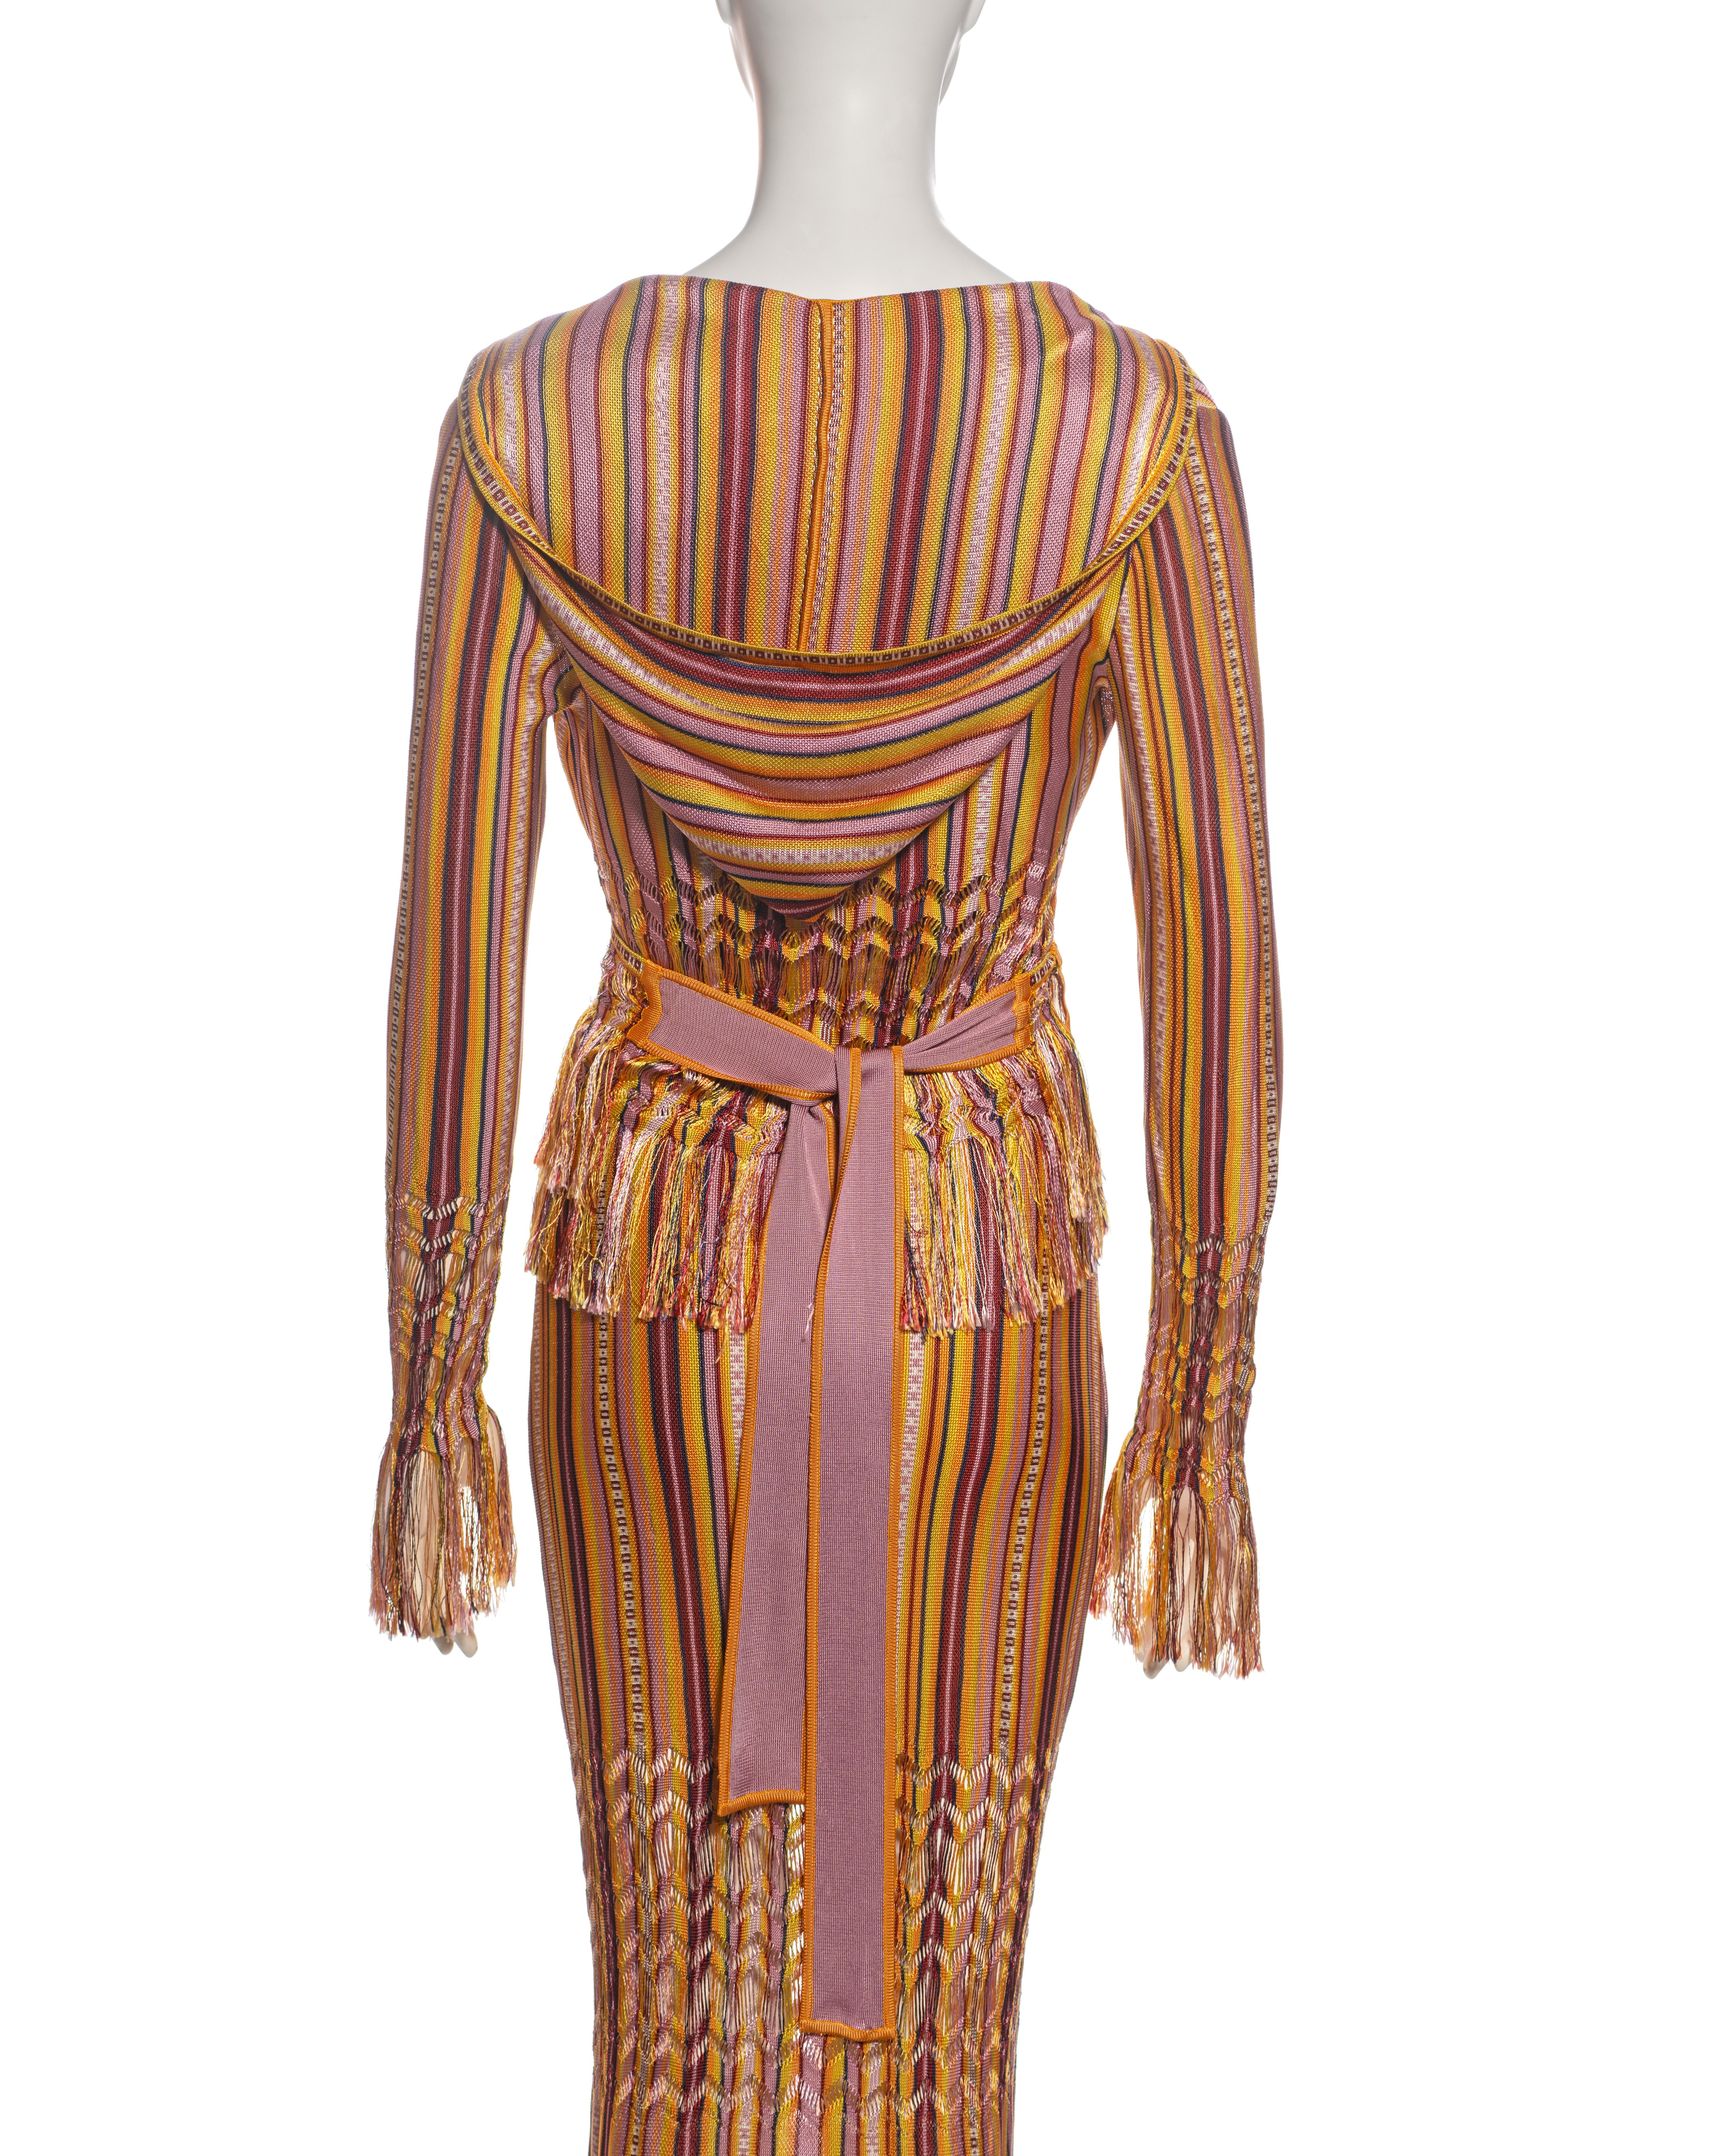 Christian Dior by John Galliano Striped Knit Maxi Dress and Cardigan, ss 2002 For Sale 9